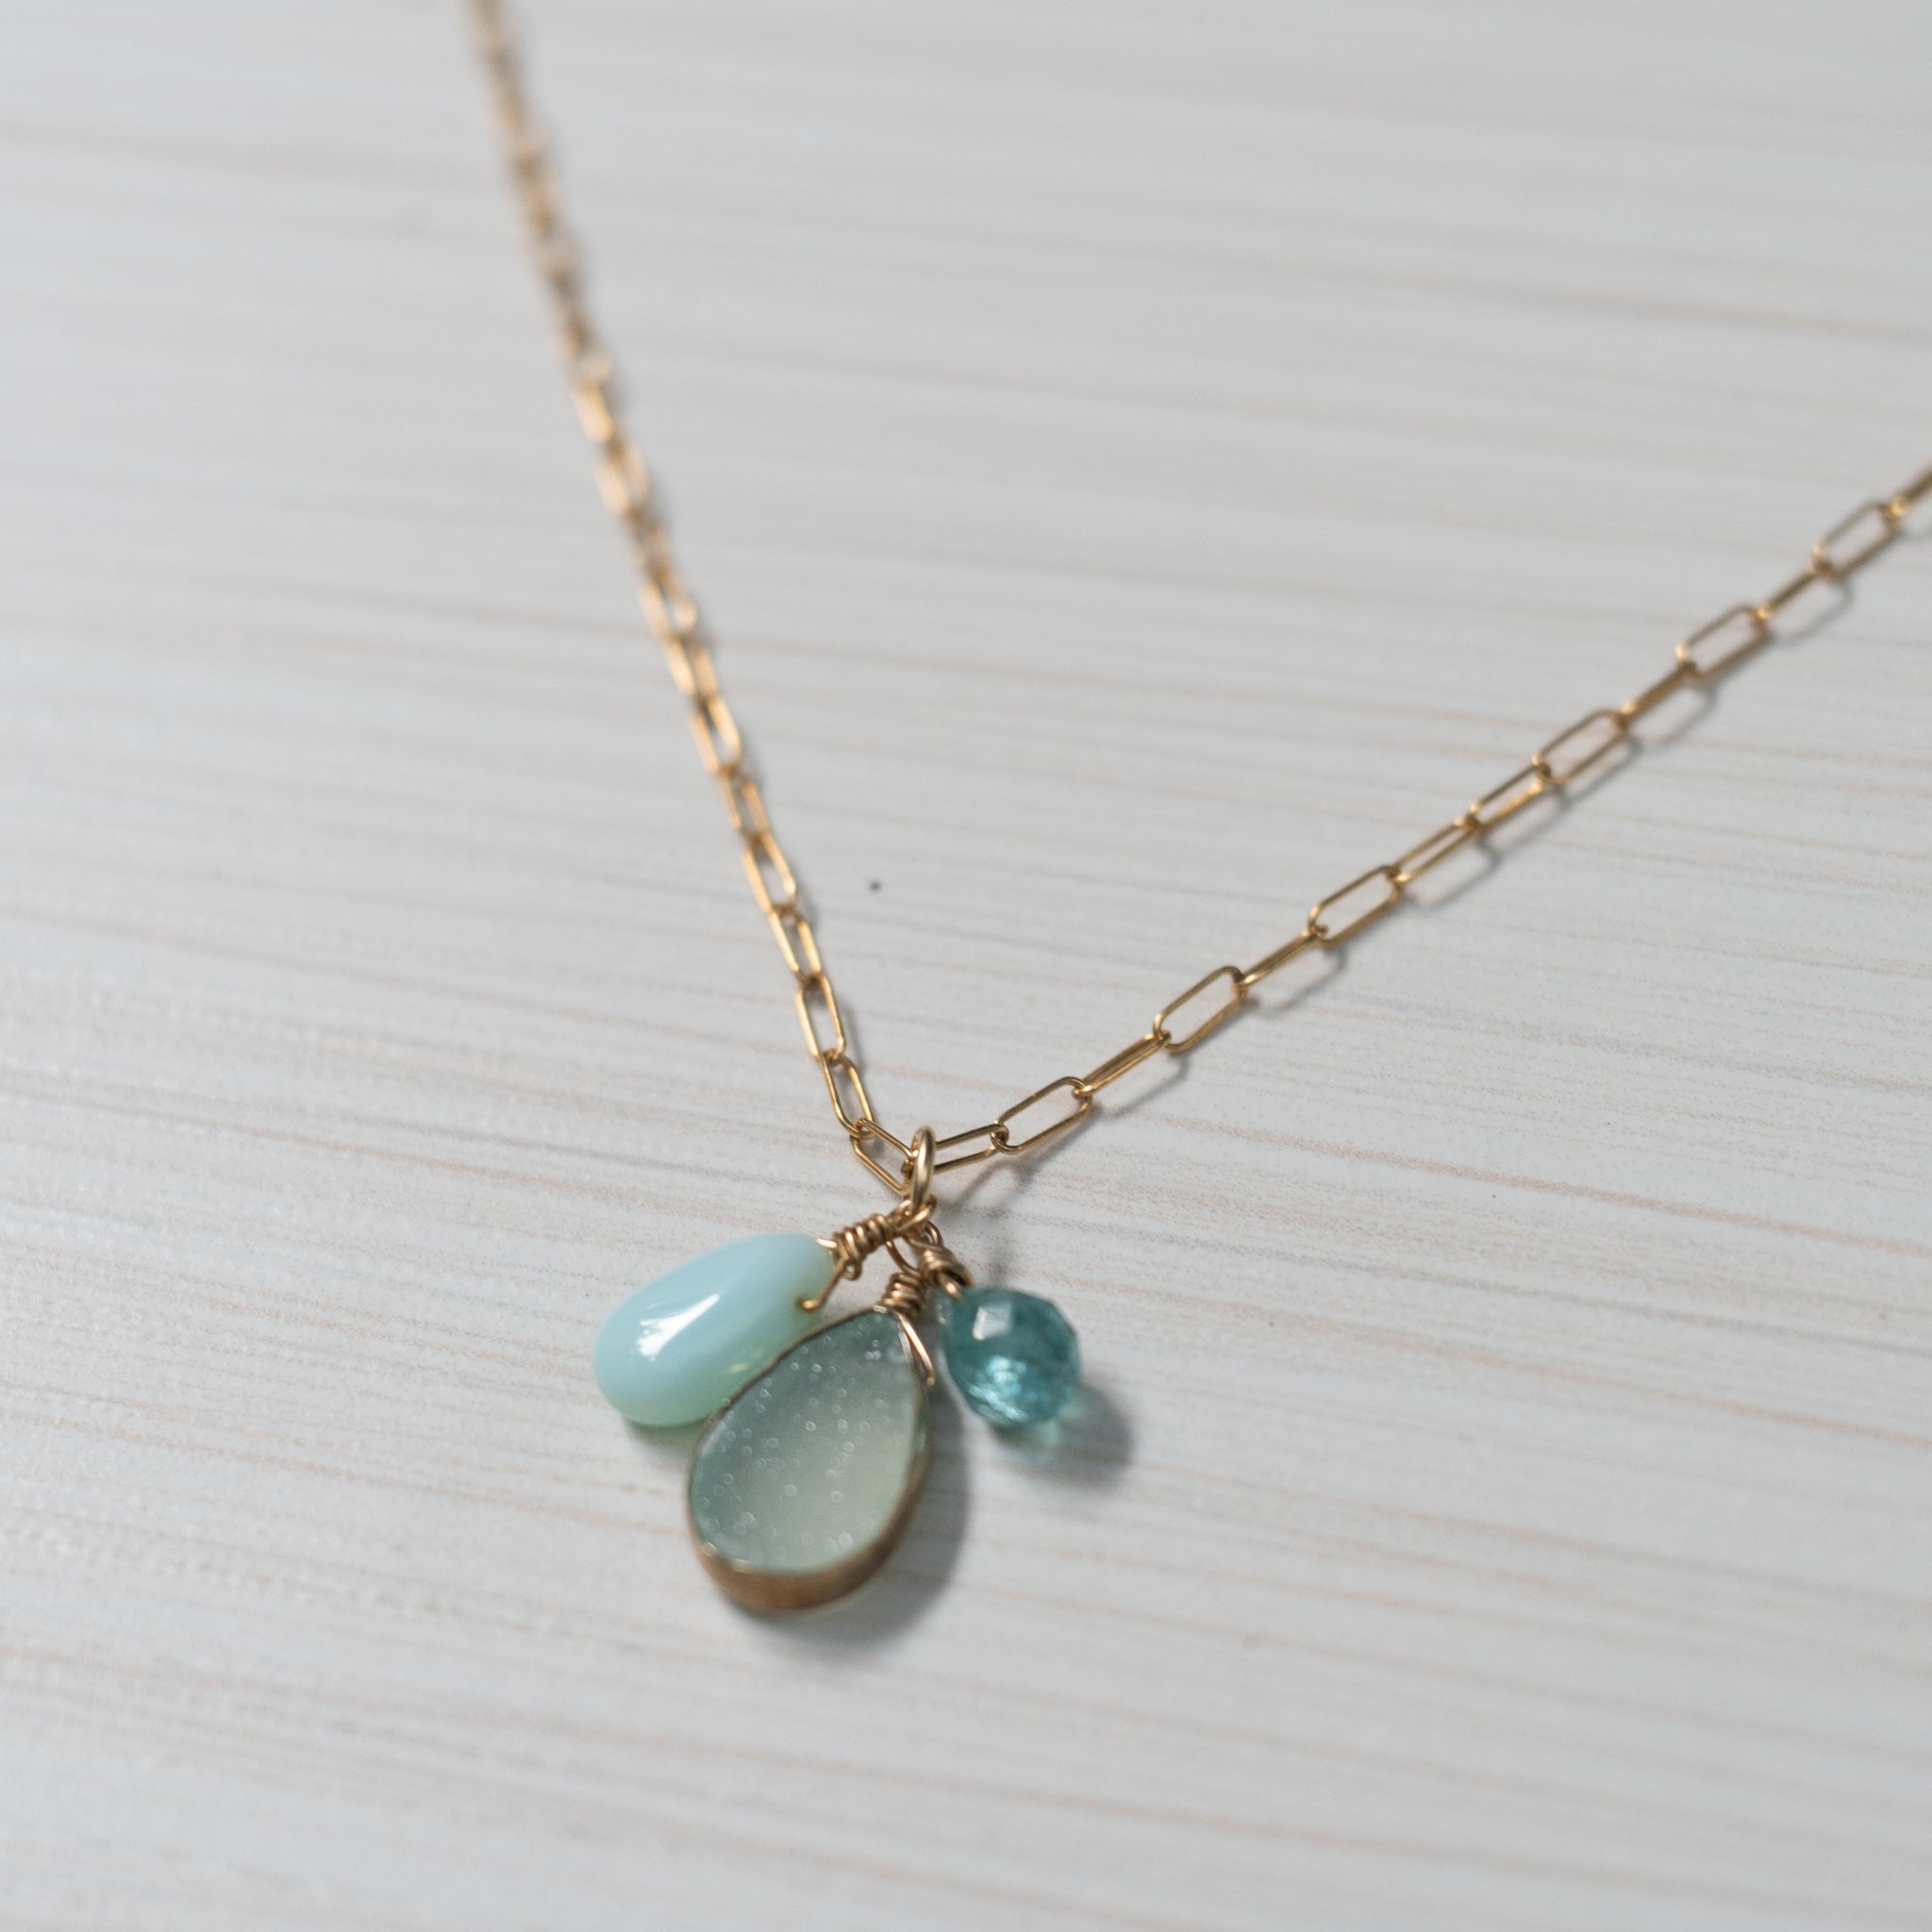 blue gemstones on simple gold necklace handmade in Hawaii by eve black jewelry